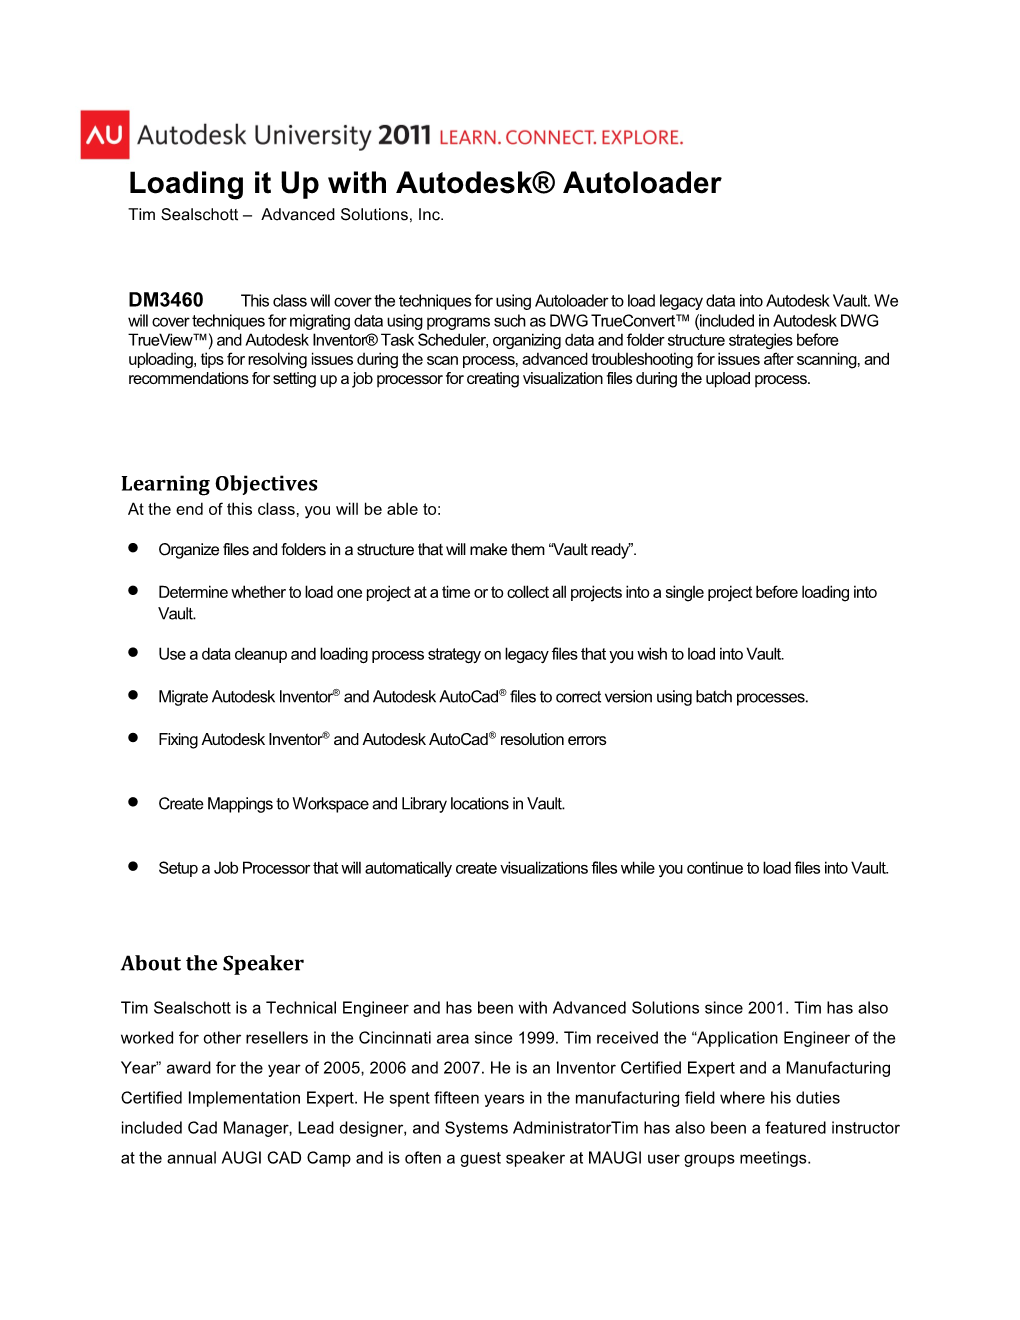 Loading It up with Autodesk Autoloader